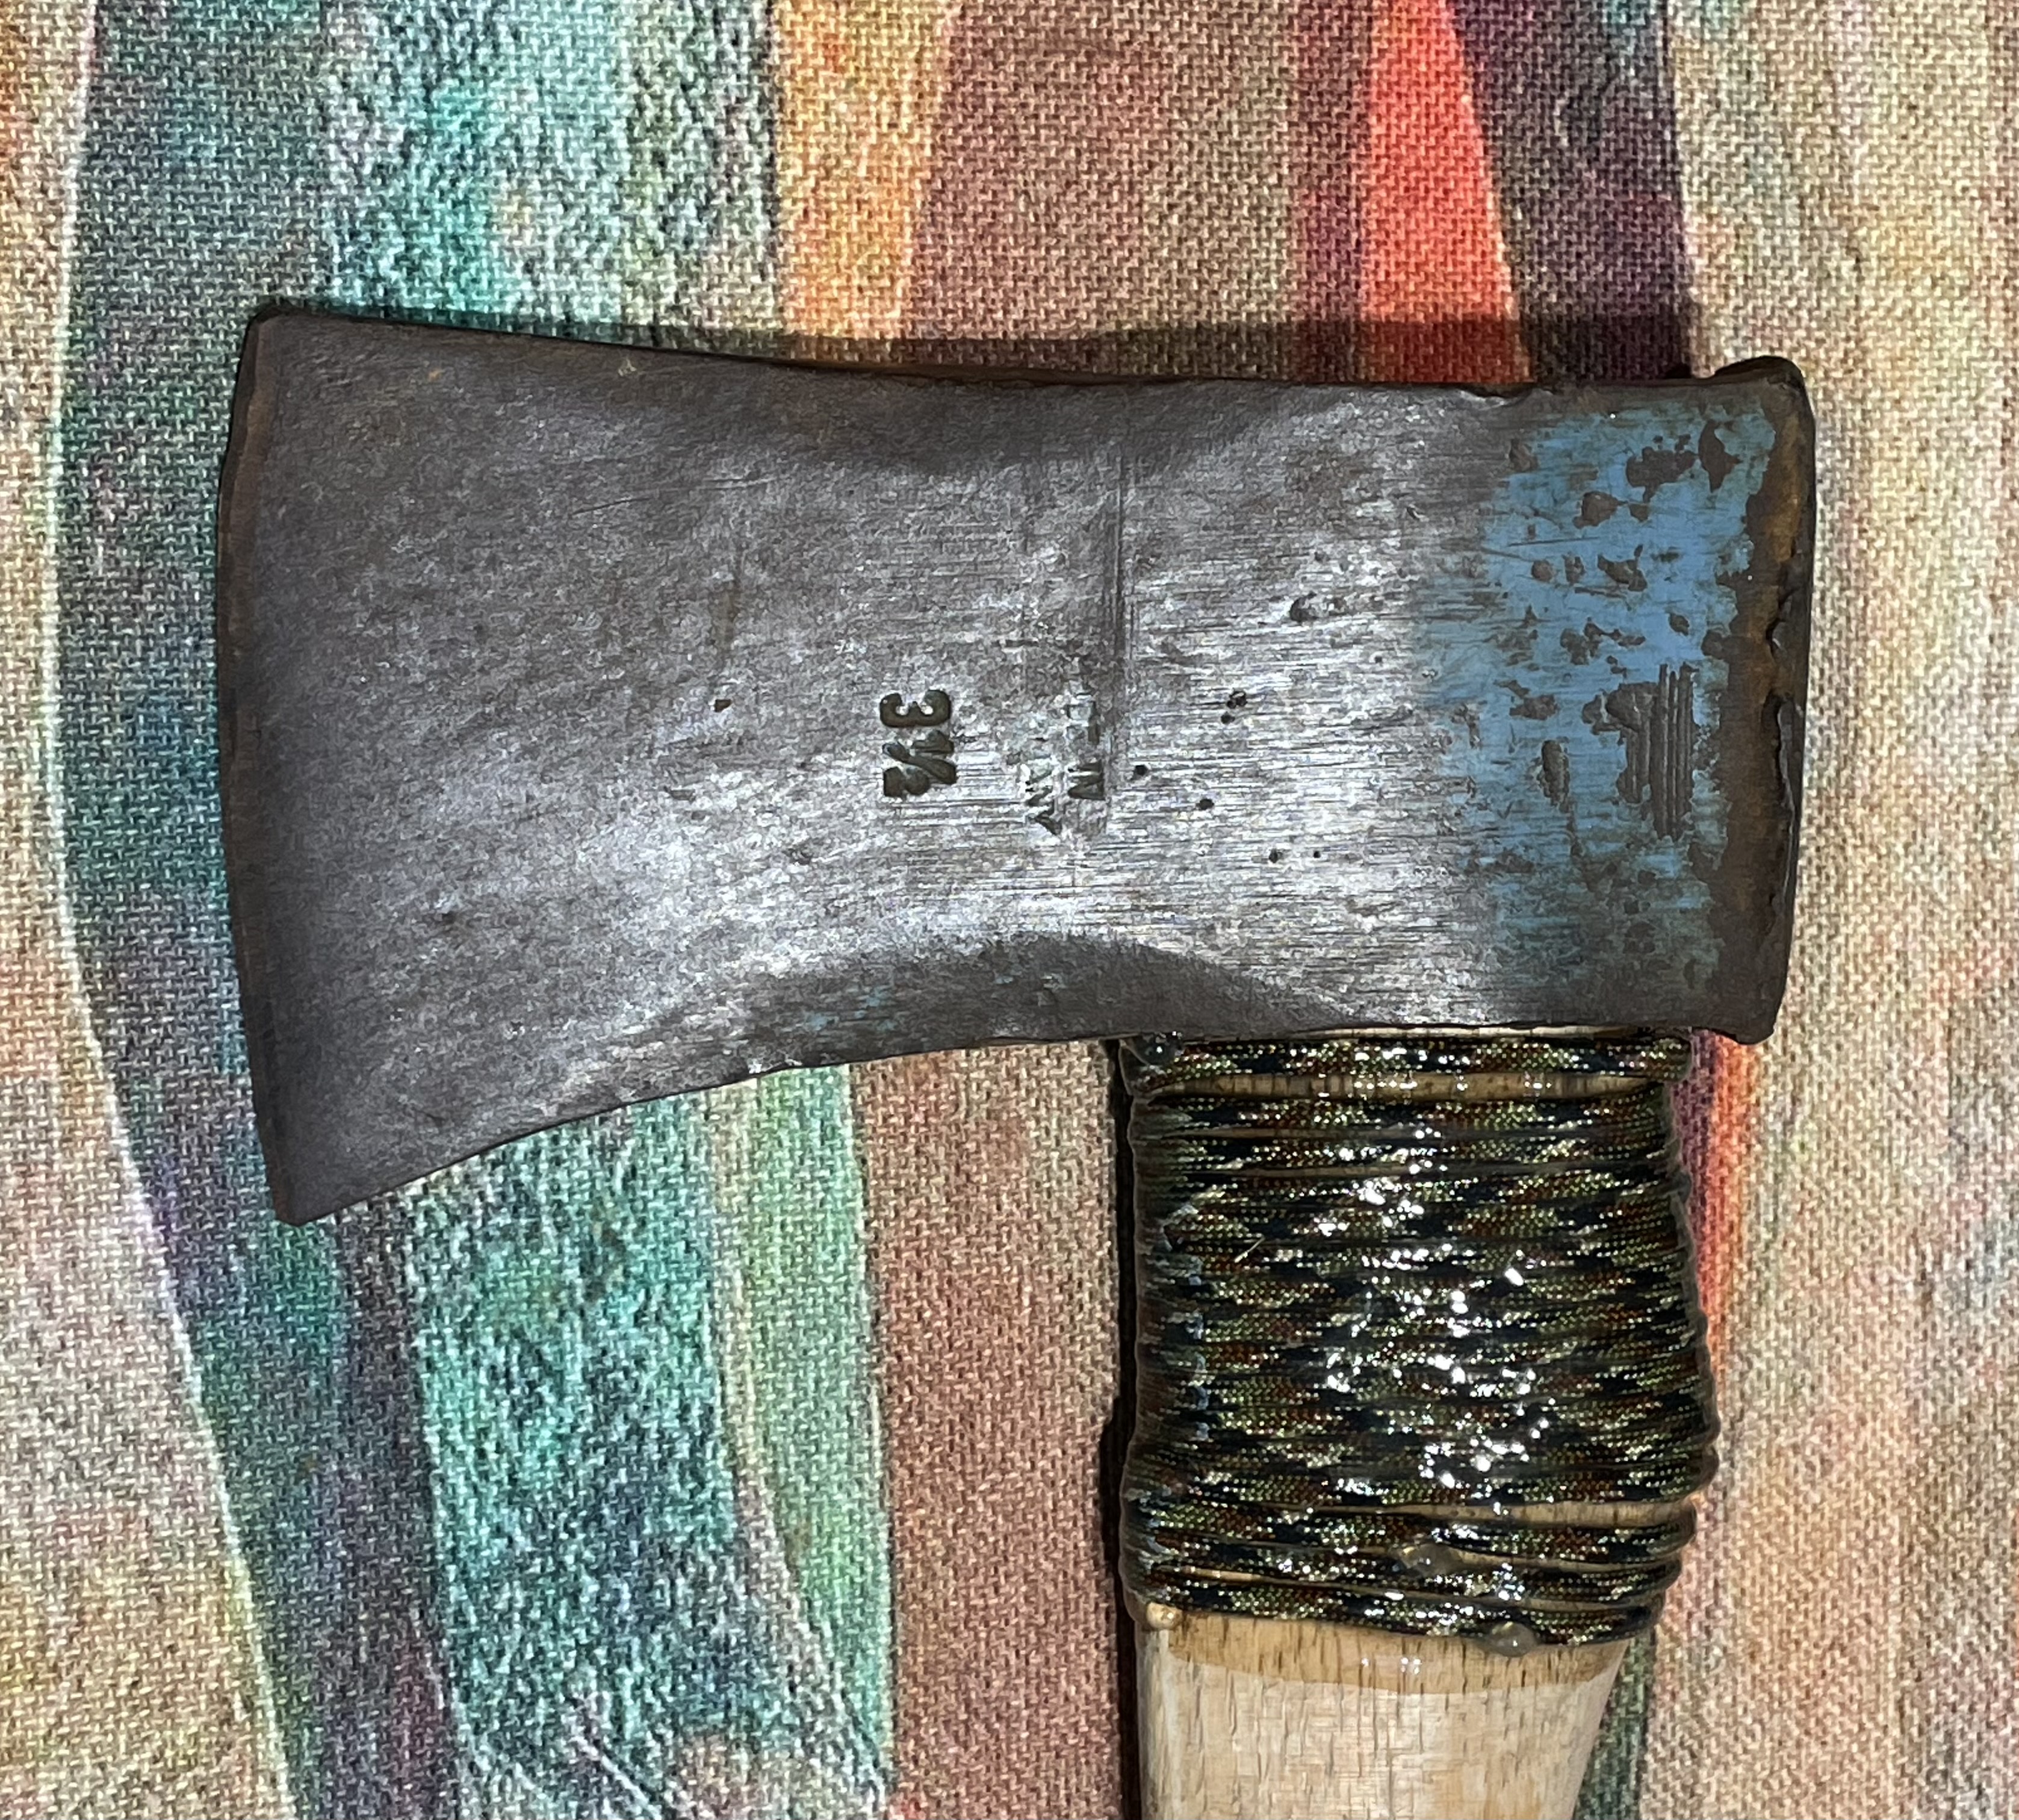 another thread entitled "Can anyone ID this old axe head?"